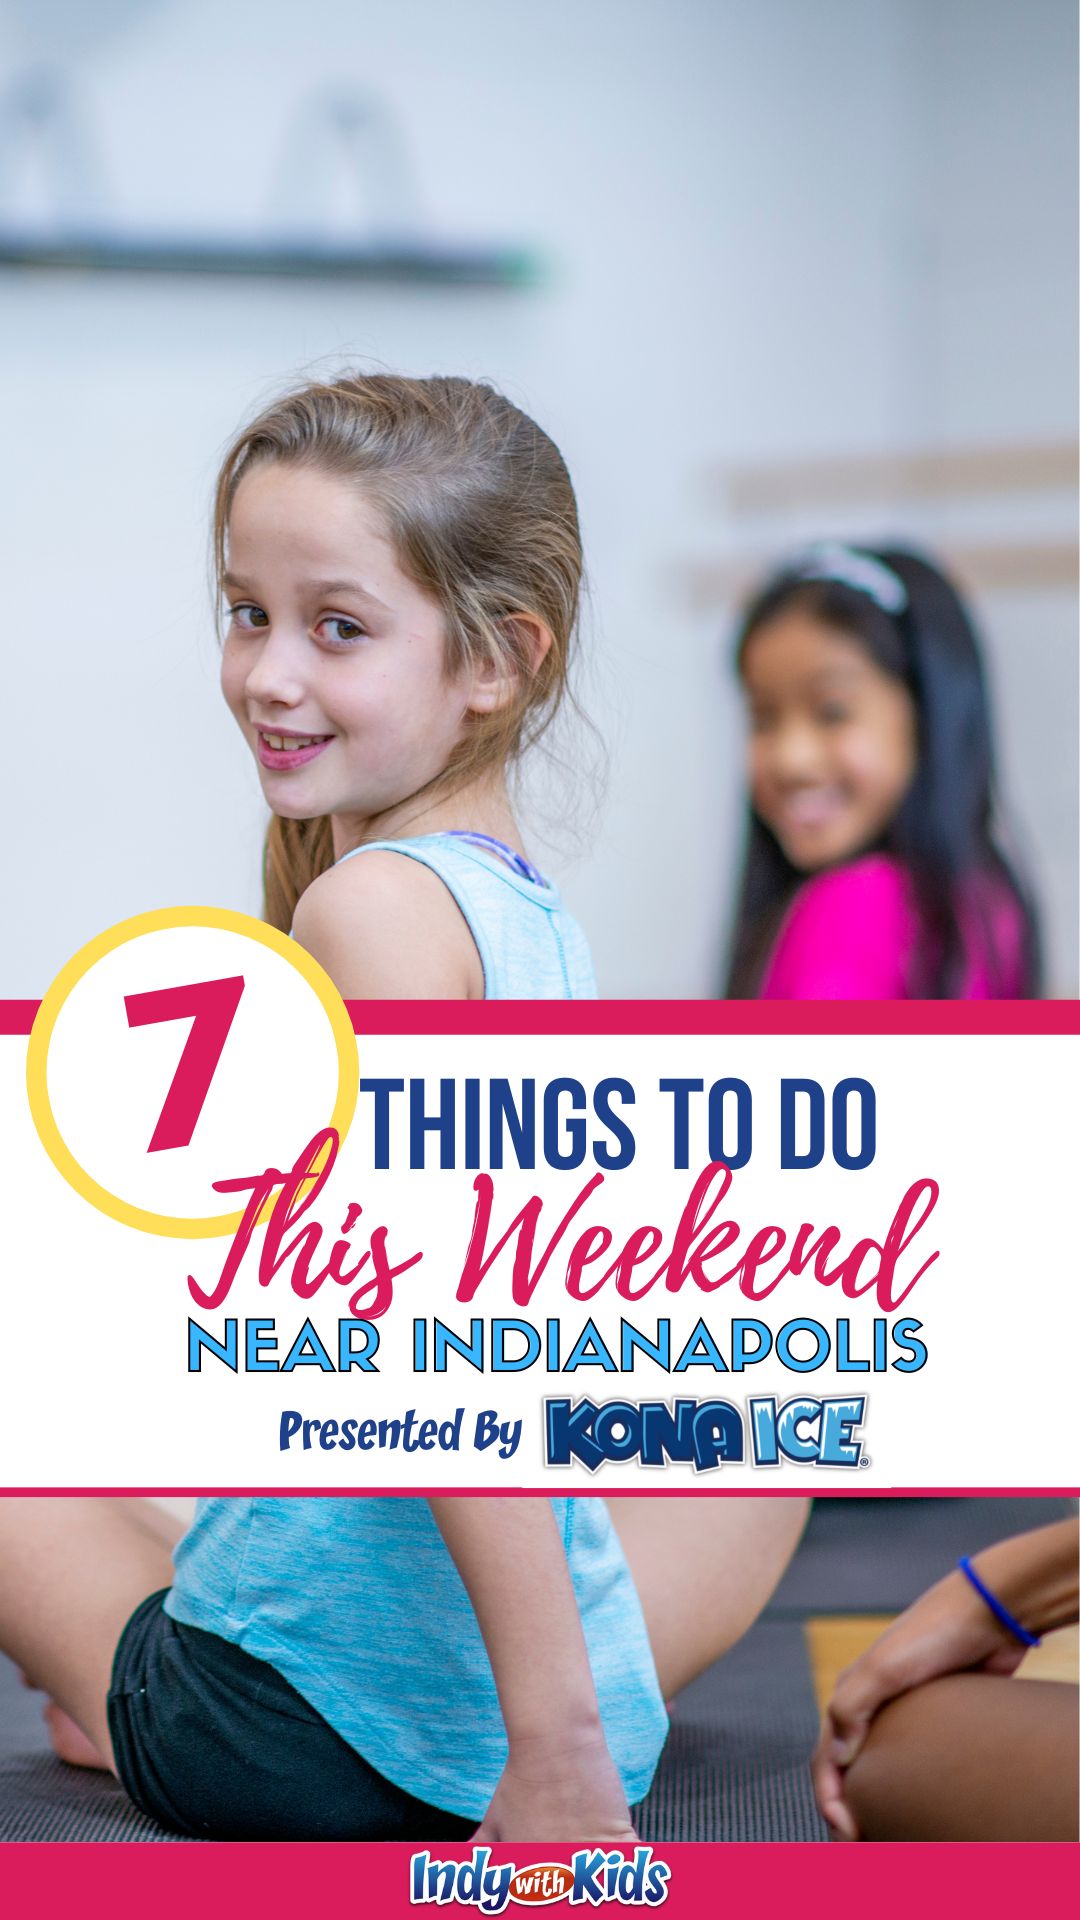 Things to do this Weekend August 26-28